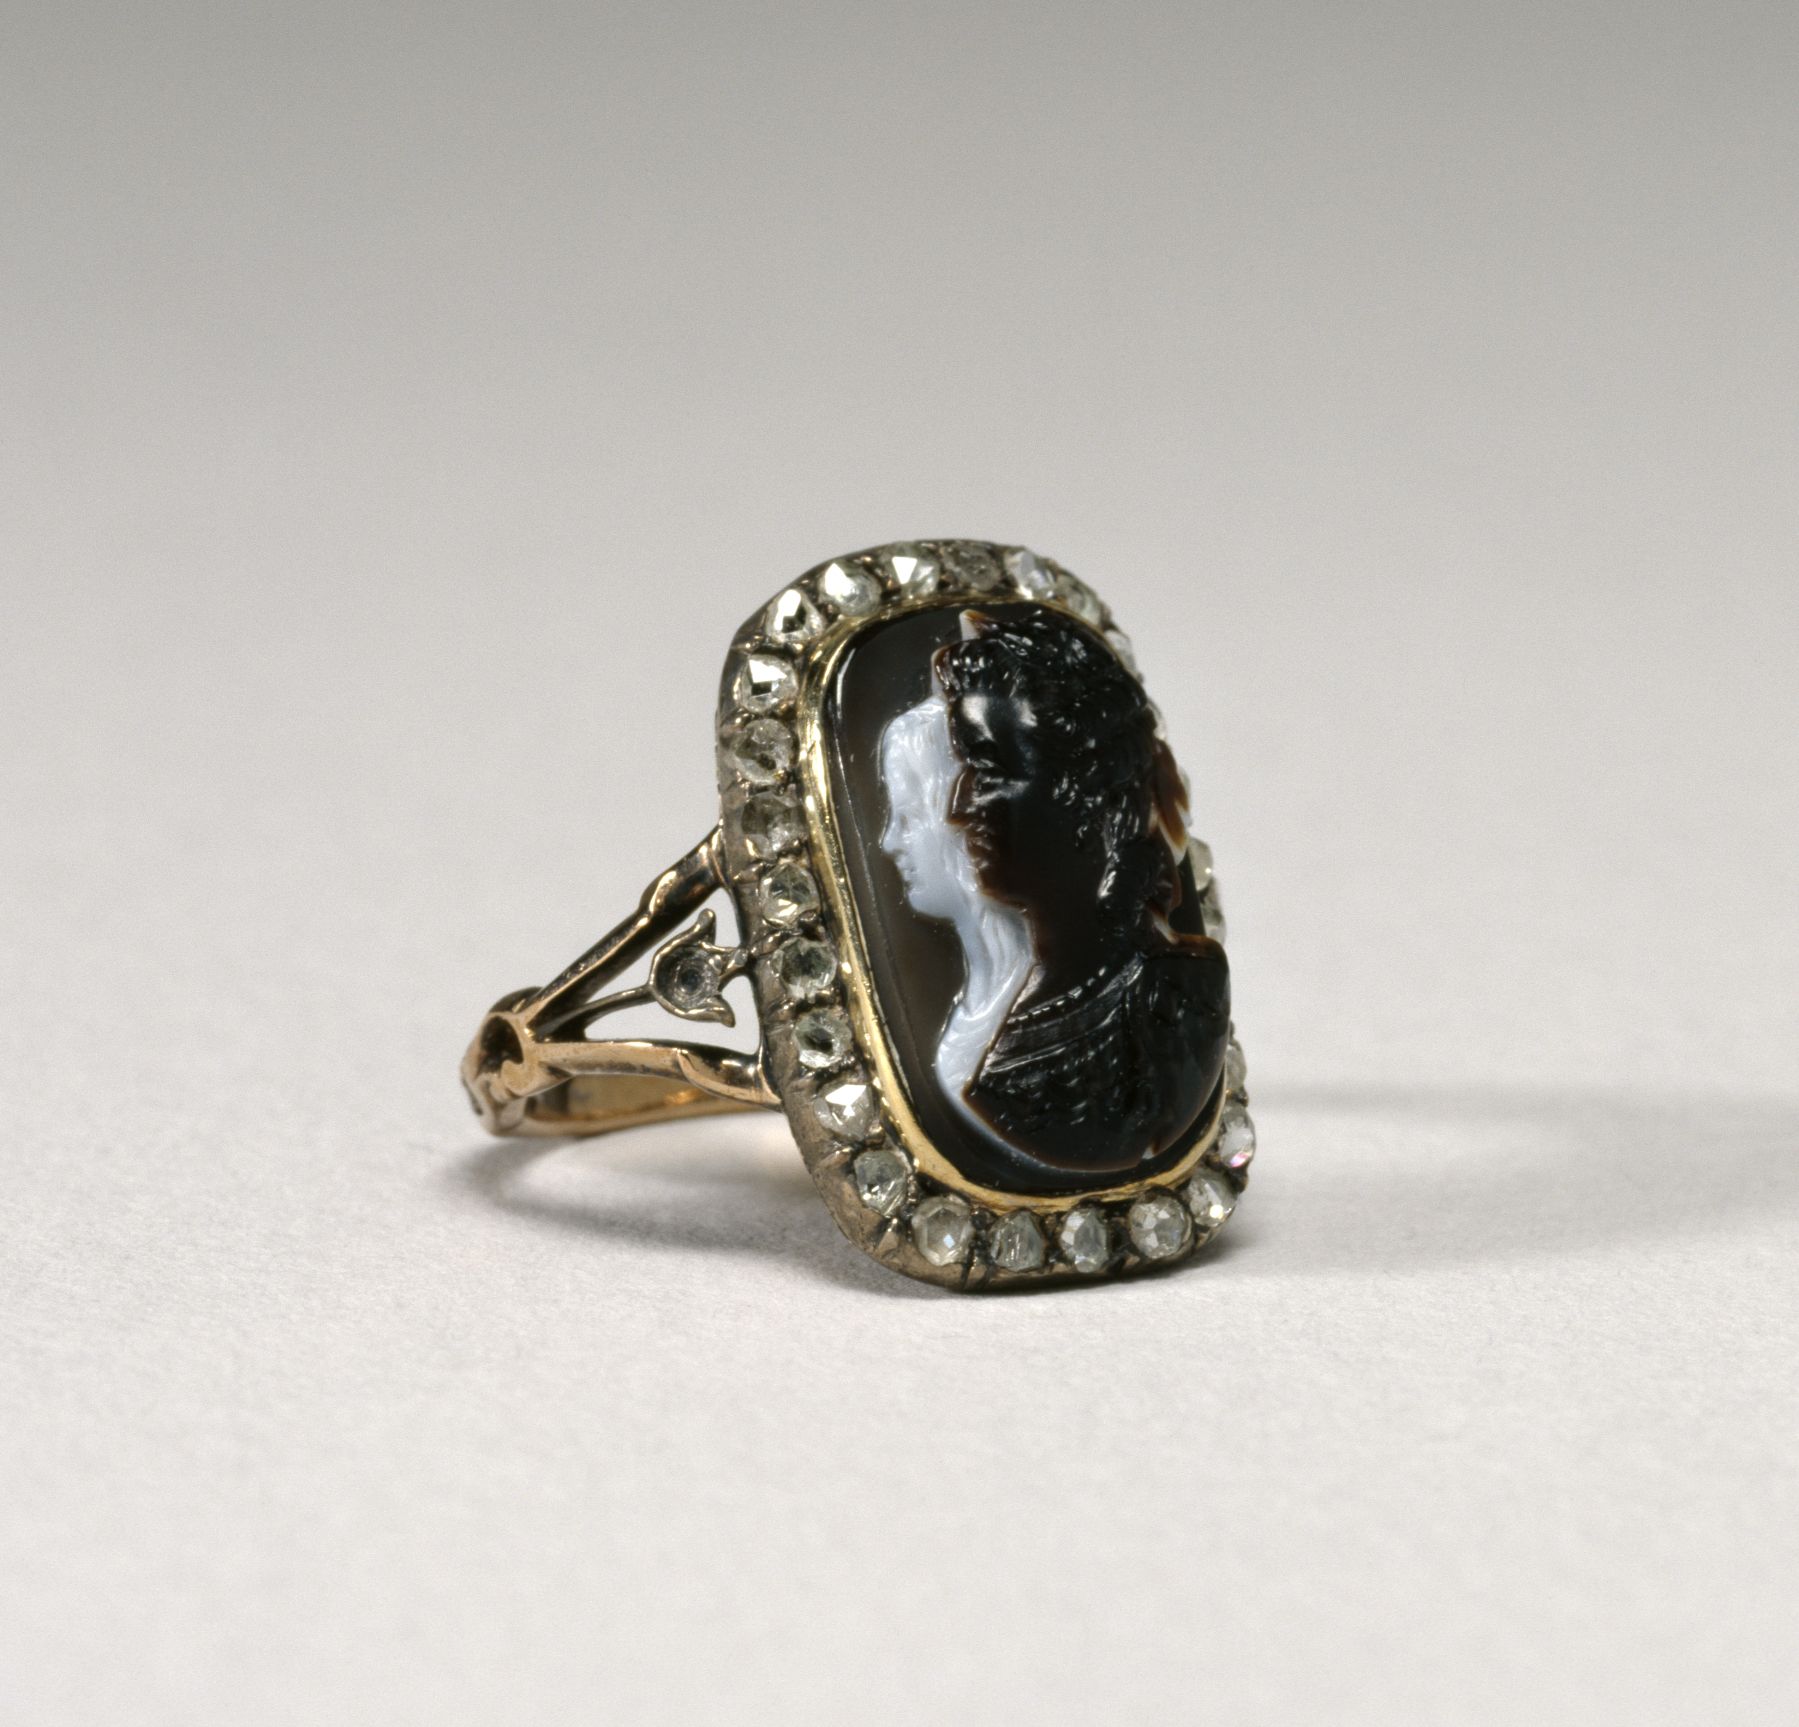 Cameo Ring depicting Marie Antoinette and her Son, the Dauphin. It may have been worn by courtier or, after the Revolution, by a royalist sympathizer. The Walters Art Museum. 